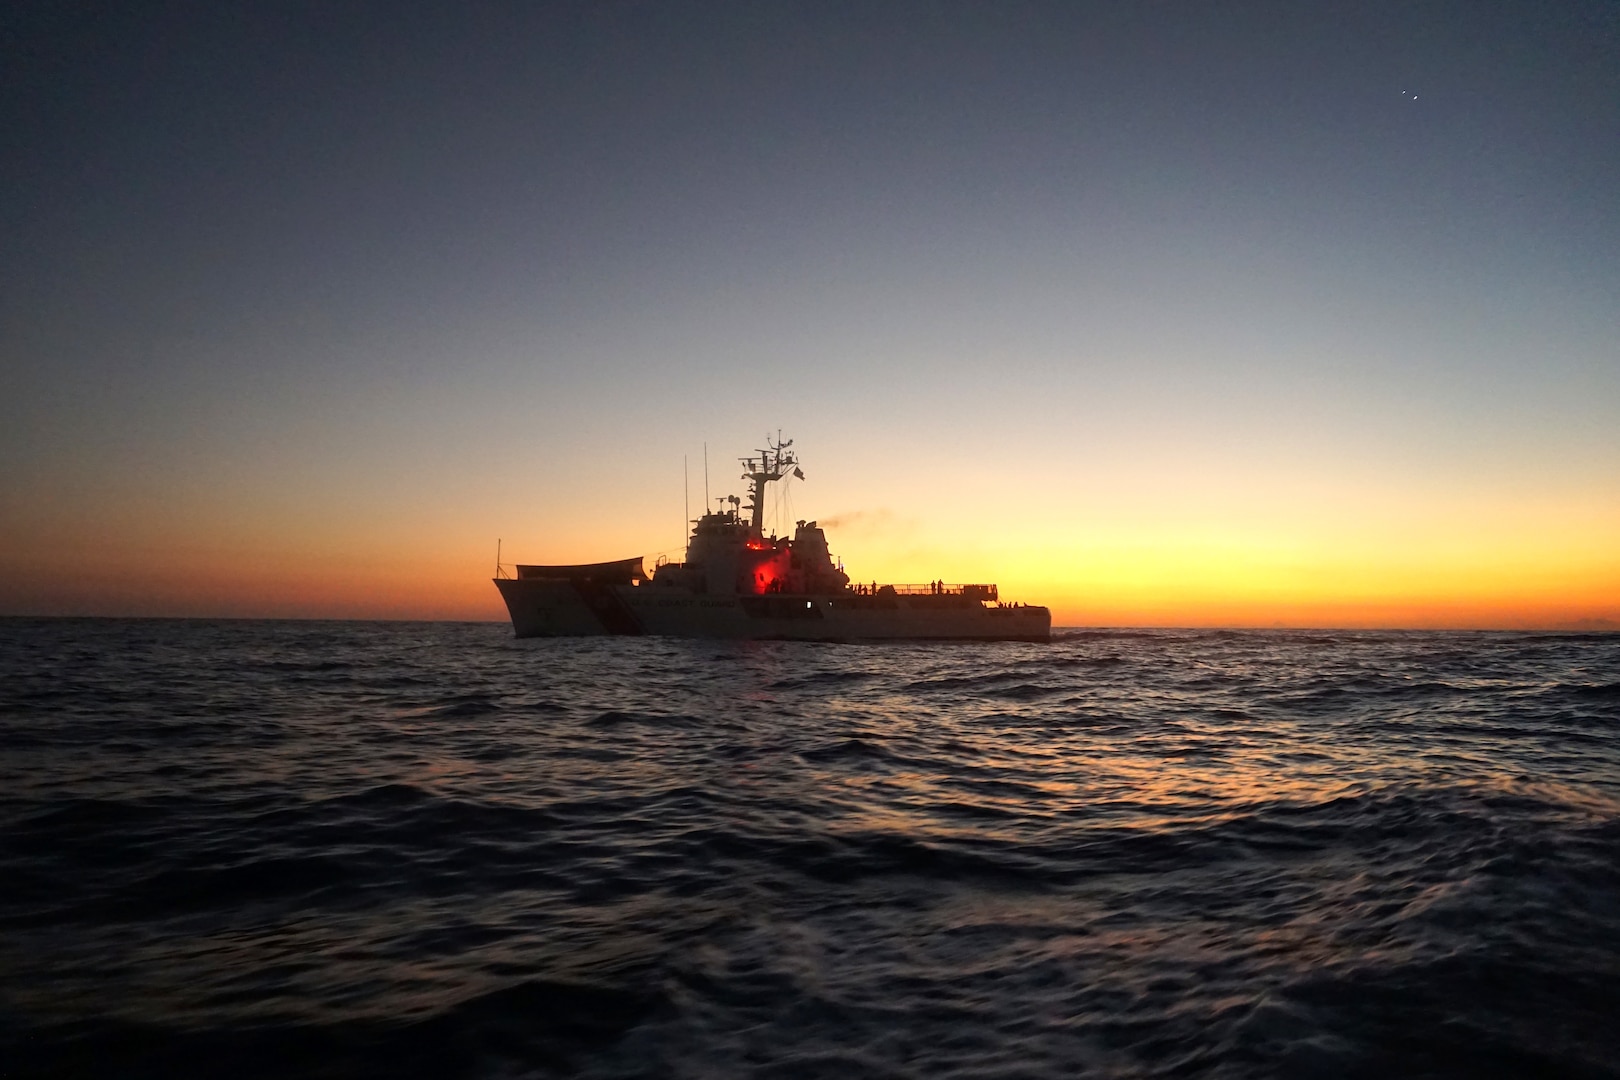 The U.S. Coast Guard Steadfast (WMEC 623) patrols the Eastern Pacific Ocean during a counternarcotics patrol, March 1, 2023. During the patrol, Steadfast conducted a rendezvous with USCGC Waesche (WMSL 751) to conduct a narcotics and personnel transfer. U.S Coast Guard photo by Lt. j.g. Geoffrey DeLorie.